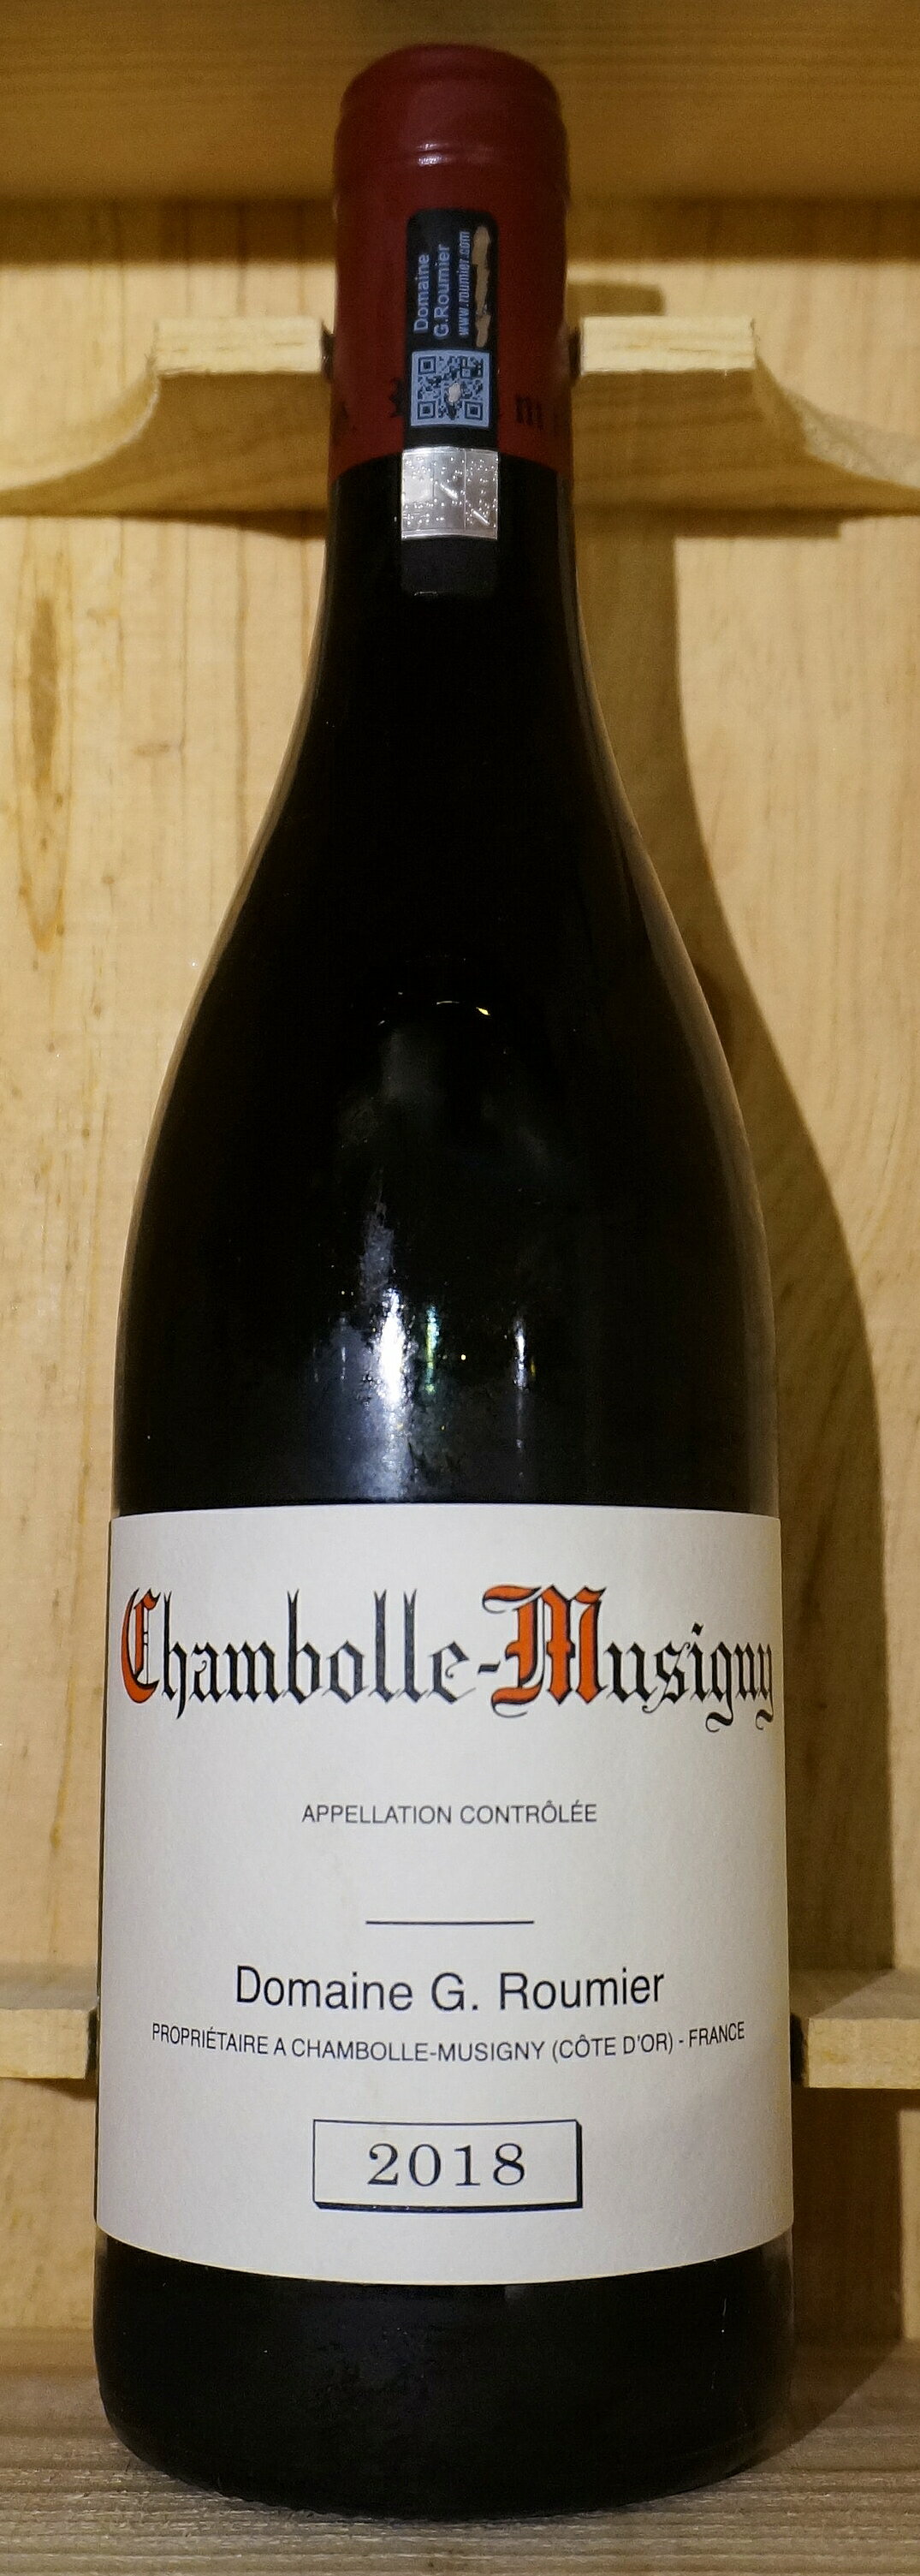 Georges RoumierChambolle Musigny 750mlシャンボール・ミュジニー750mlジョルジュ・ルーミエ Georges Roumier